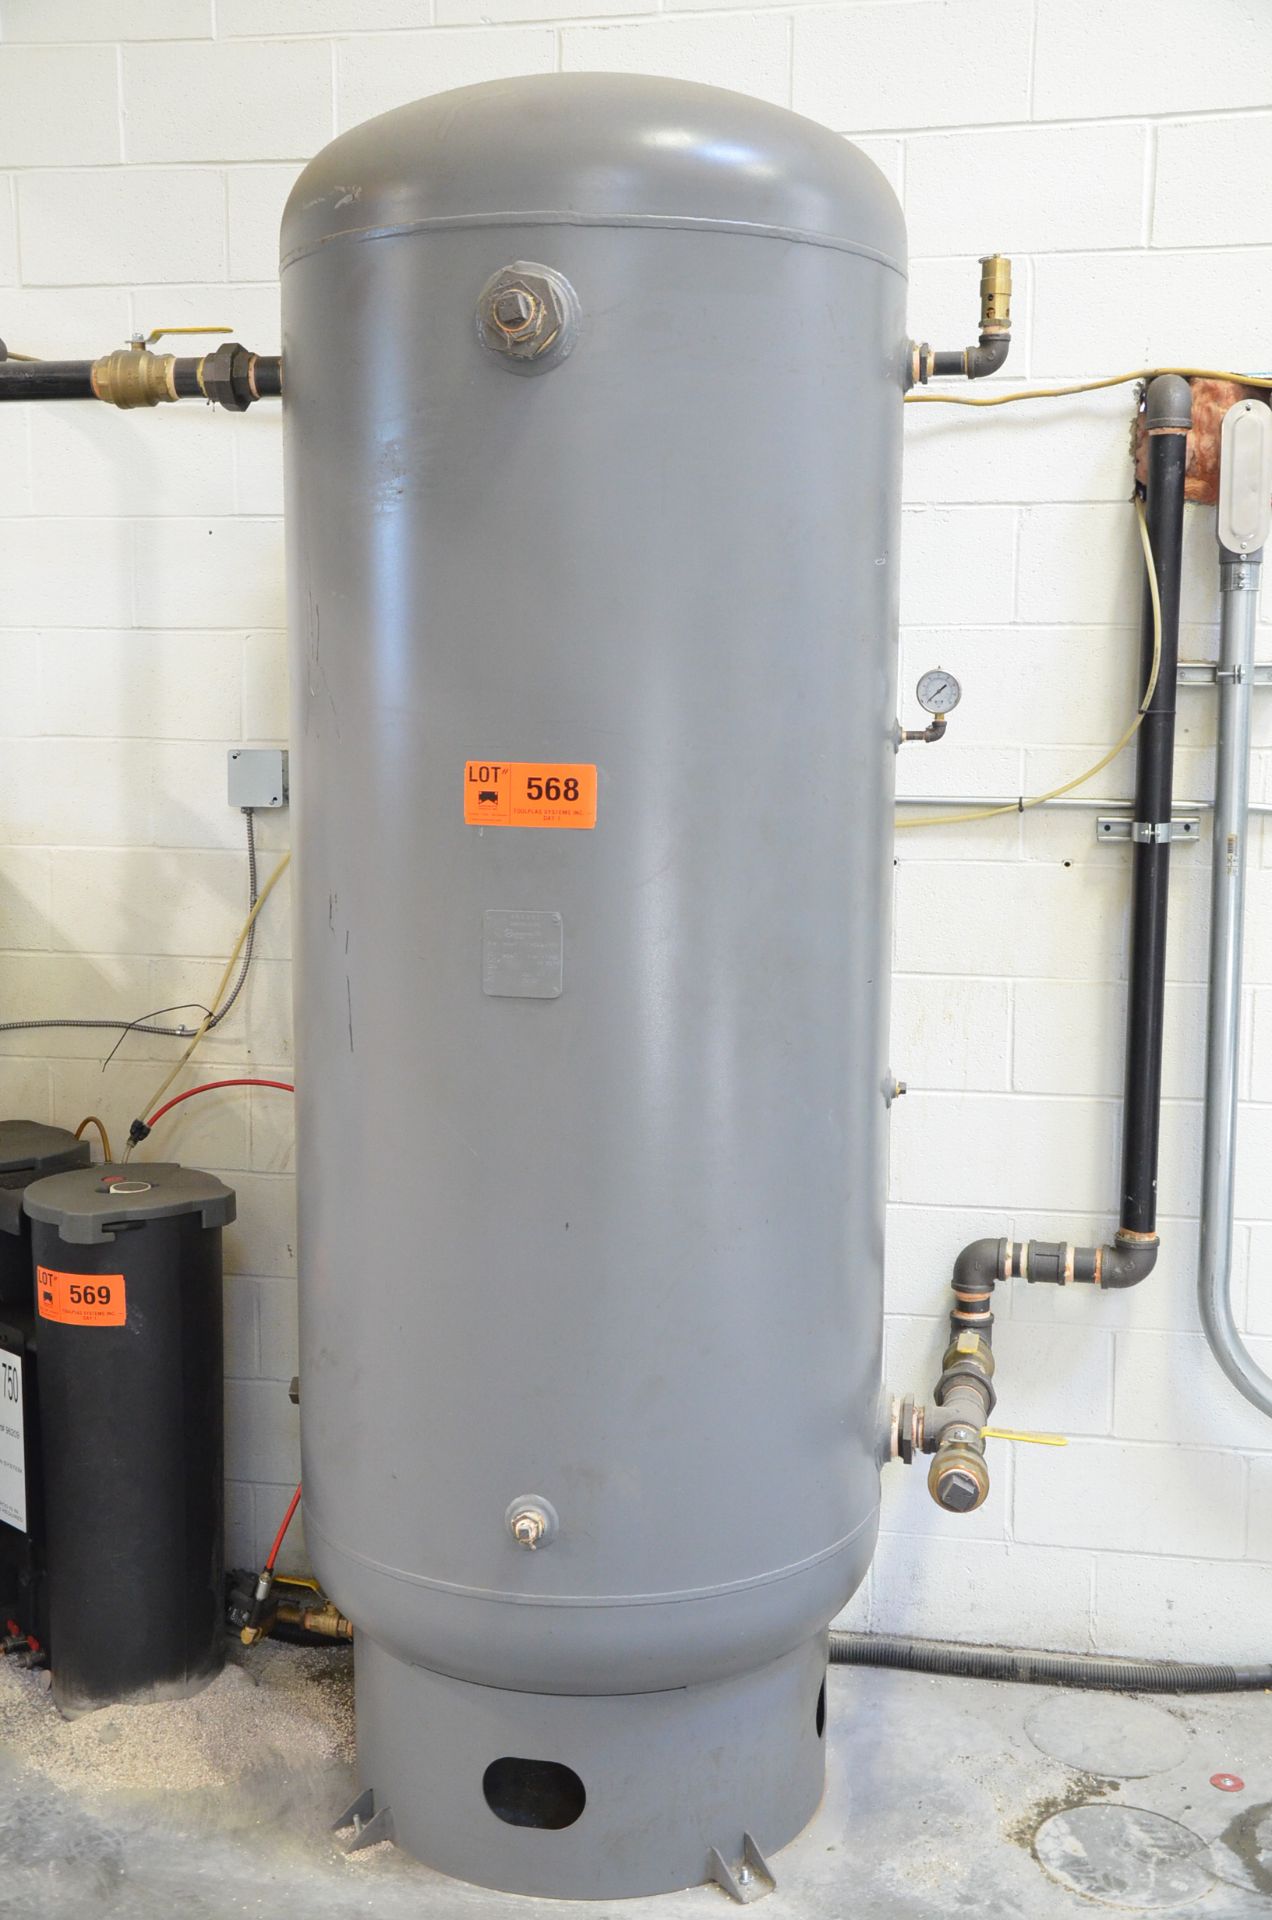 MANCHESTER LTD APPROX. 400 GAL CAPACITY AIR RECEIVER TANK, S/N N/A (SLIGHT DELAY DELIVERY) (CI) [